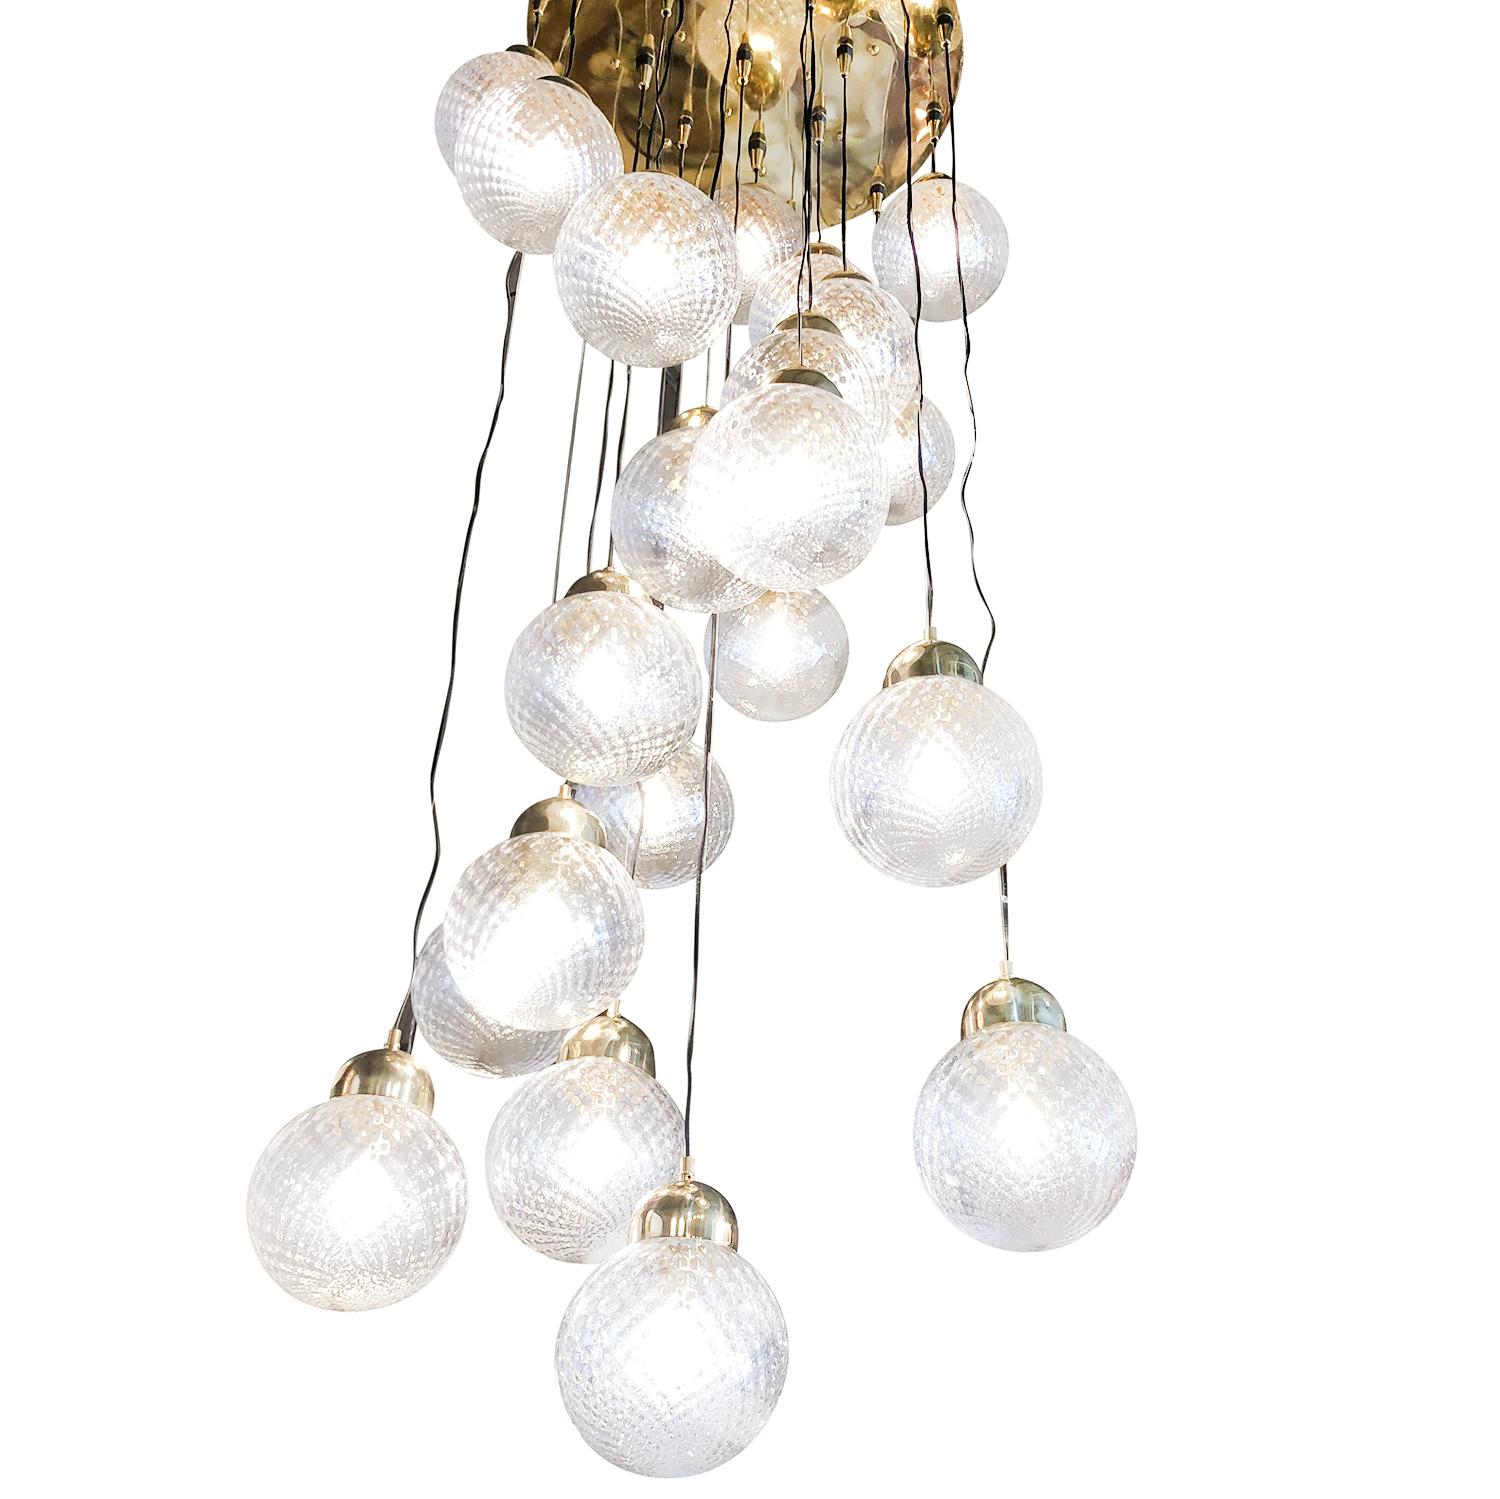 A very large Mid-Century Modern Italian ceiling light, lamp by an Italian designer. This chandelier is composed of a hand crafted brass frame plate and nineteen lightly frosted, hand blown Murano glass sphere bulbs and topped with brass pendant